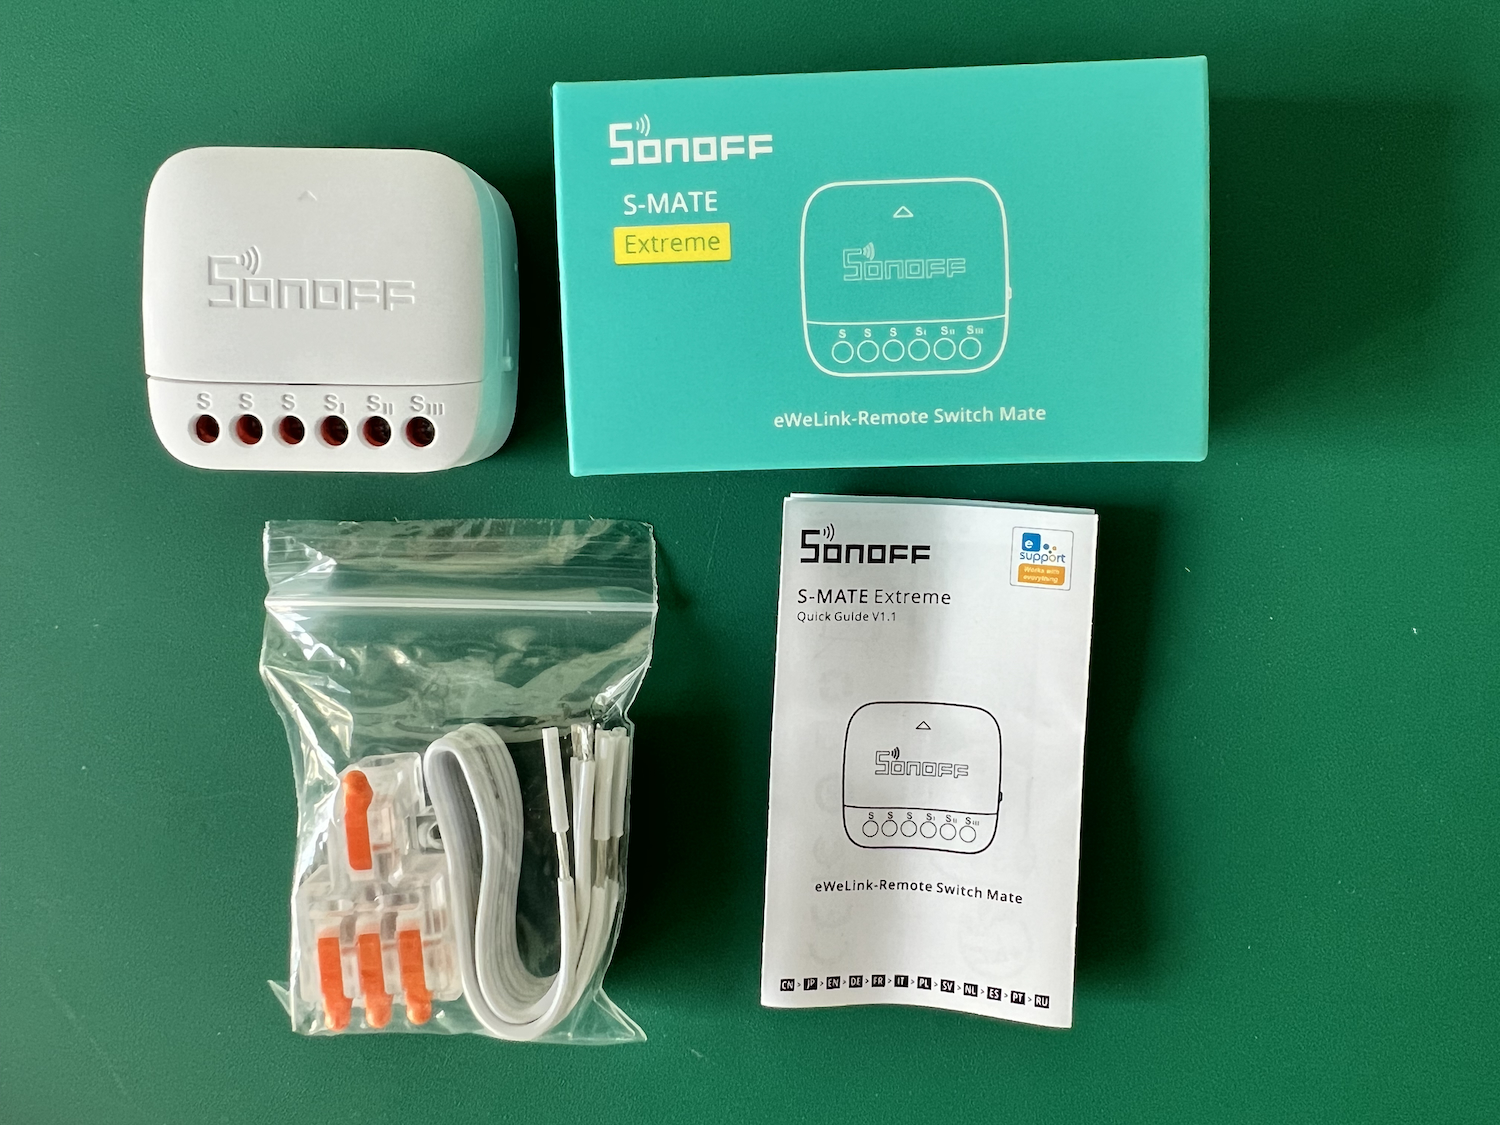 CNX Software Limited on LinkedIn: SONOFF MINI Extreme (MINIR4) ESP32 WiFi  smart switch can fit into most…